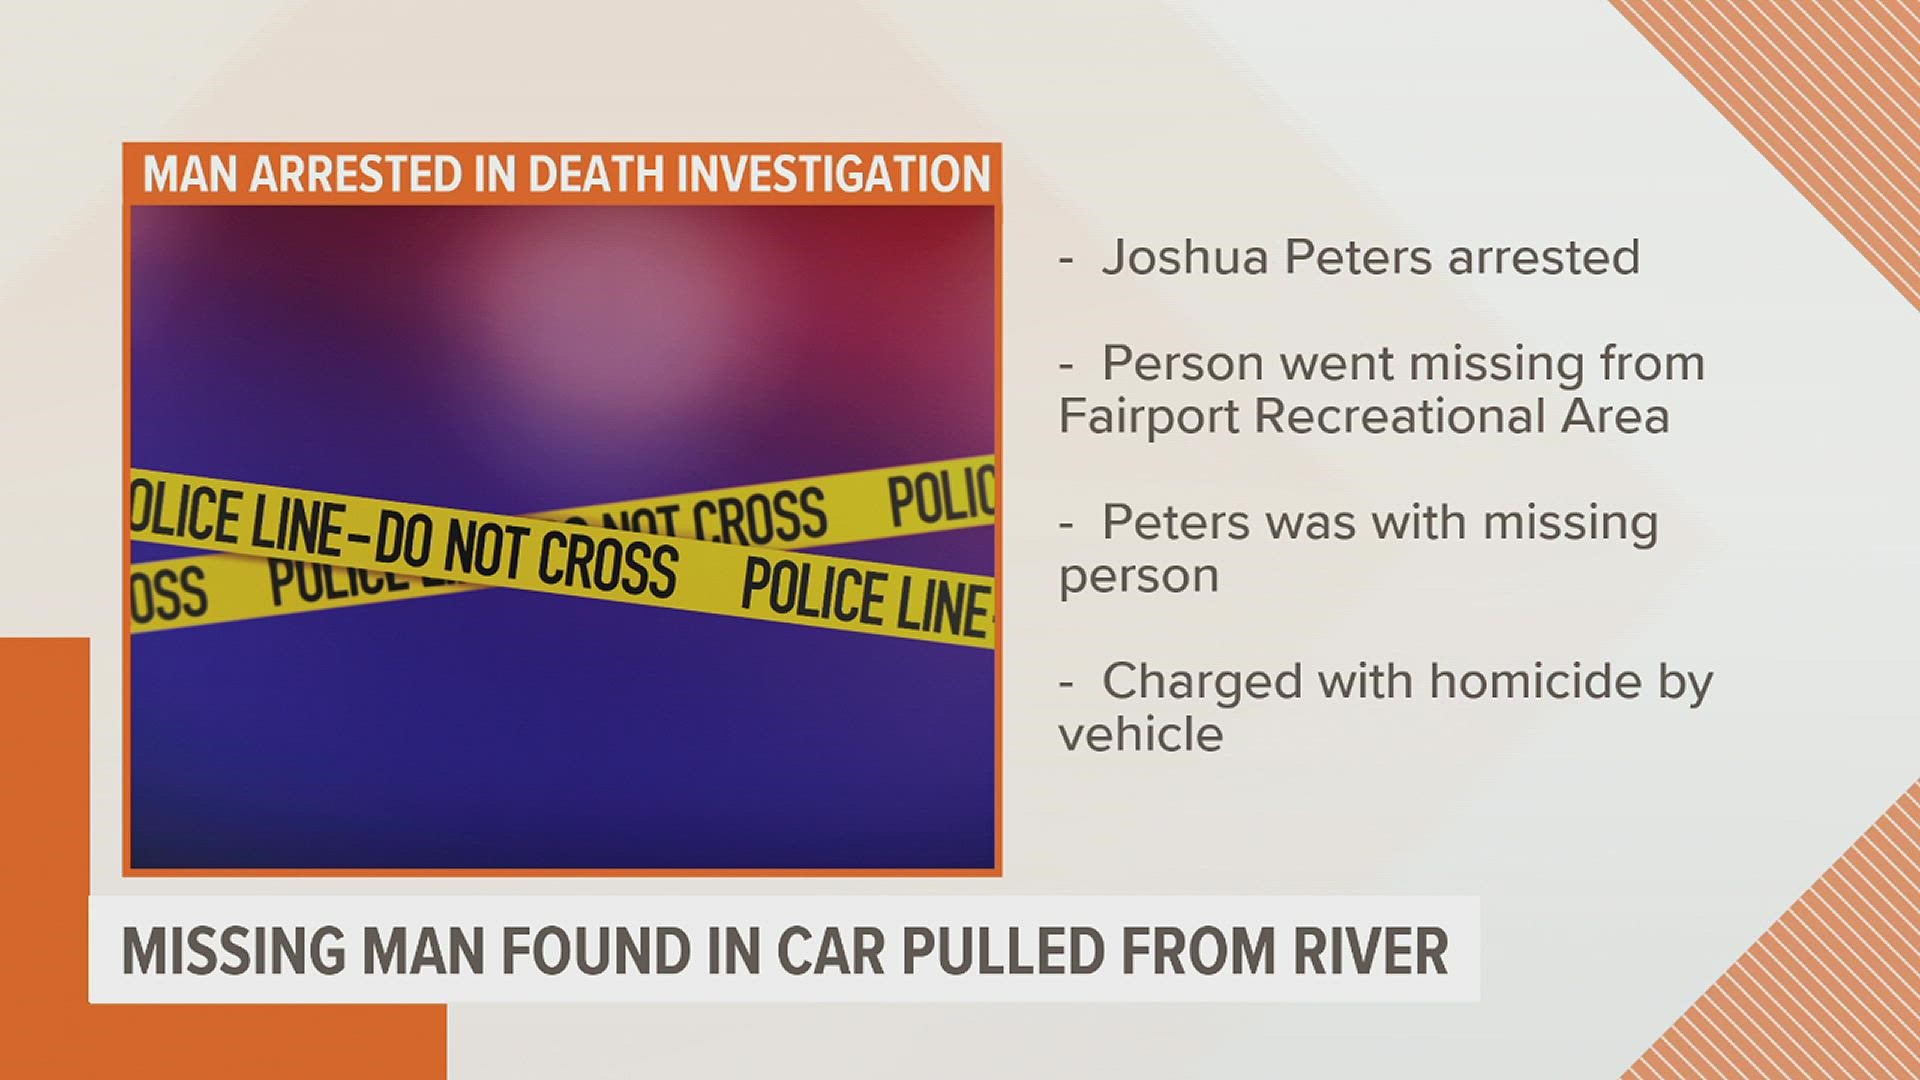 The Muscatine County Sheriff's Office says Joshua Peters, 36, is facing multiple charges after a man's body was found in a submerged car in the Mississippi River.